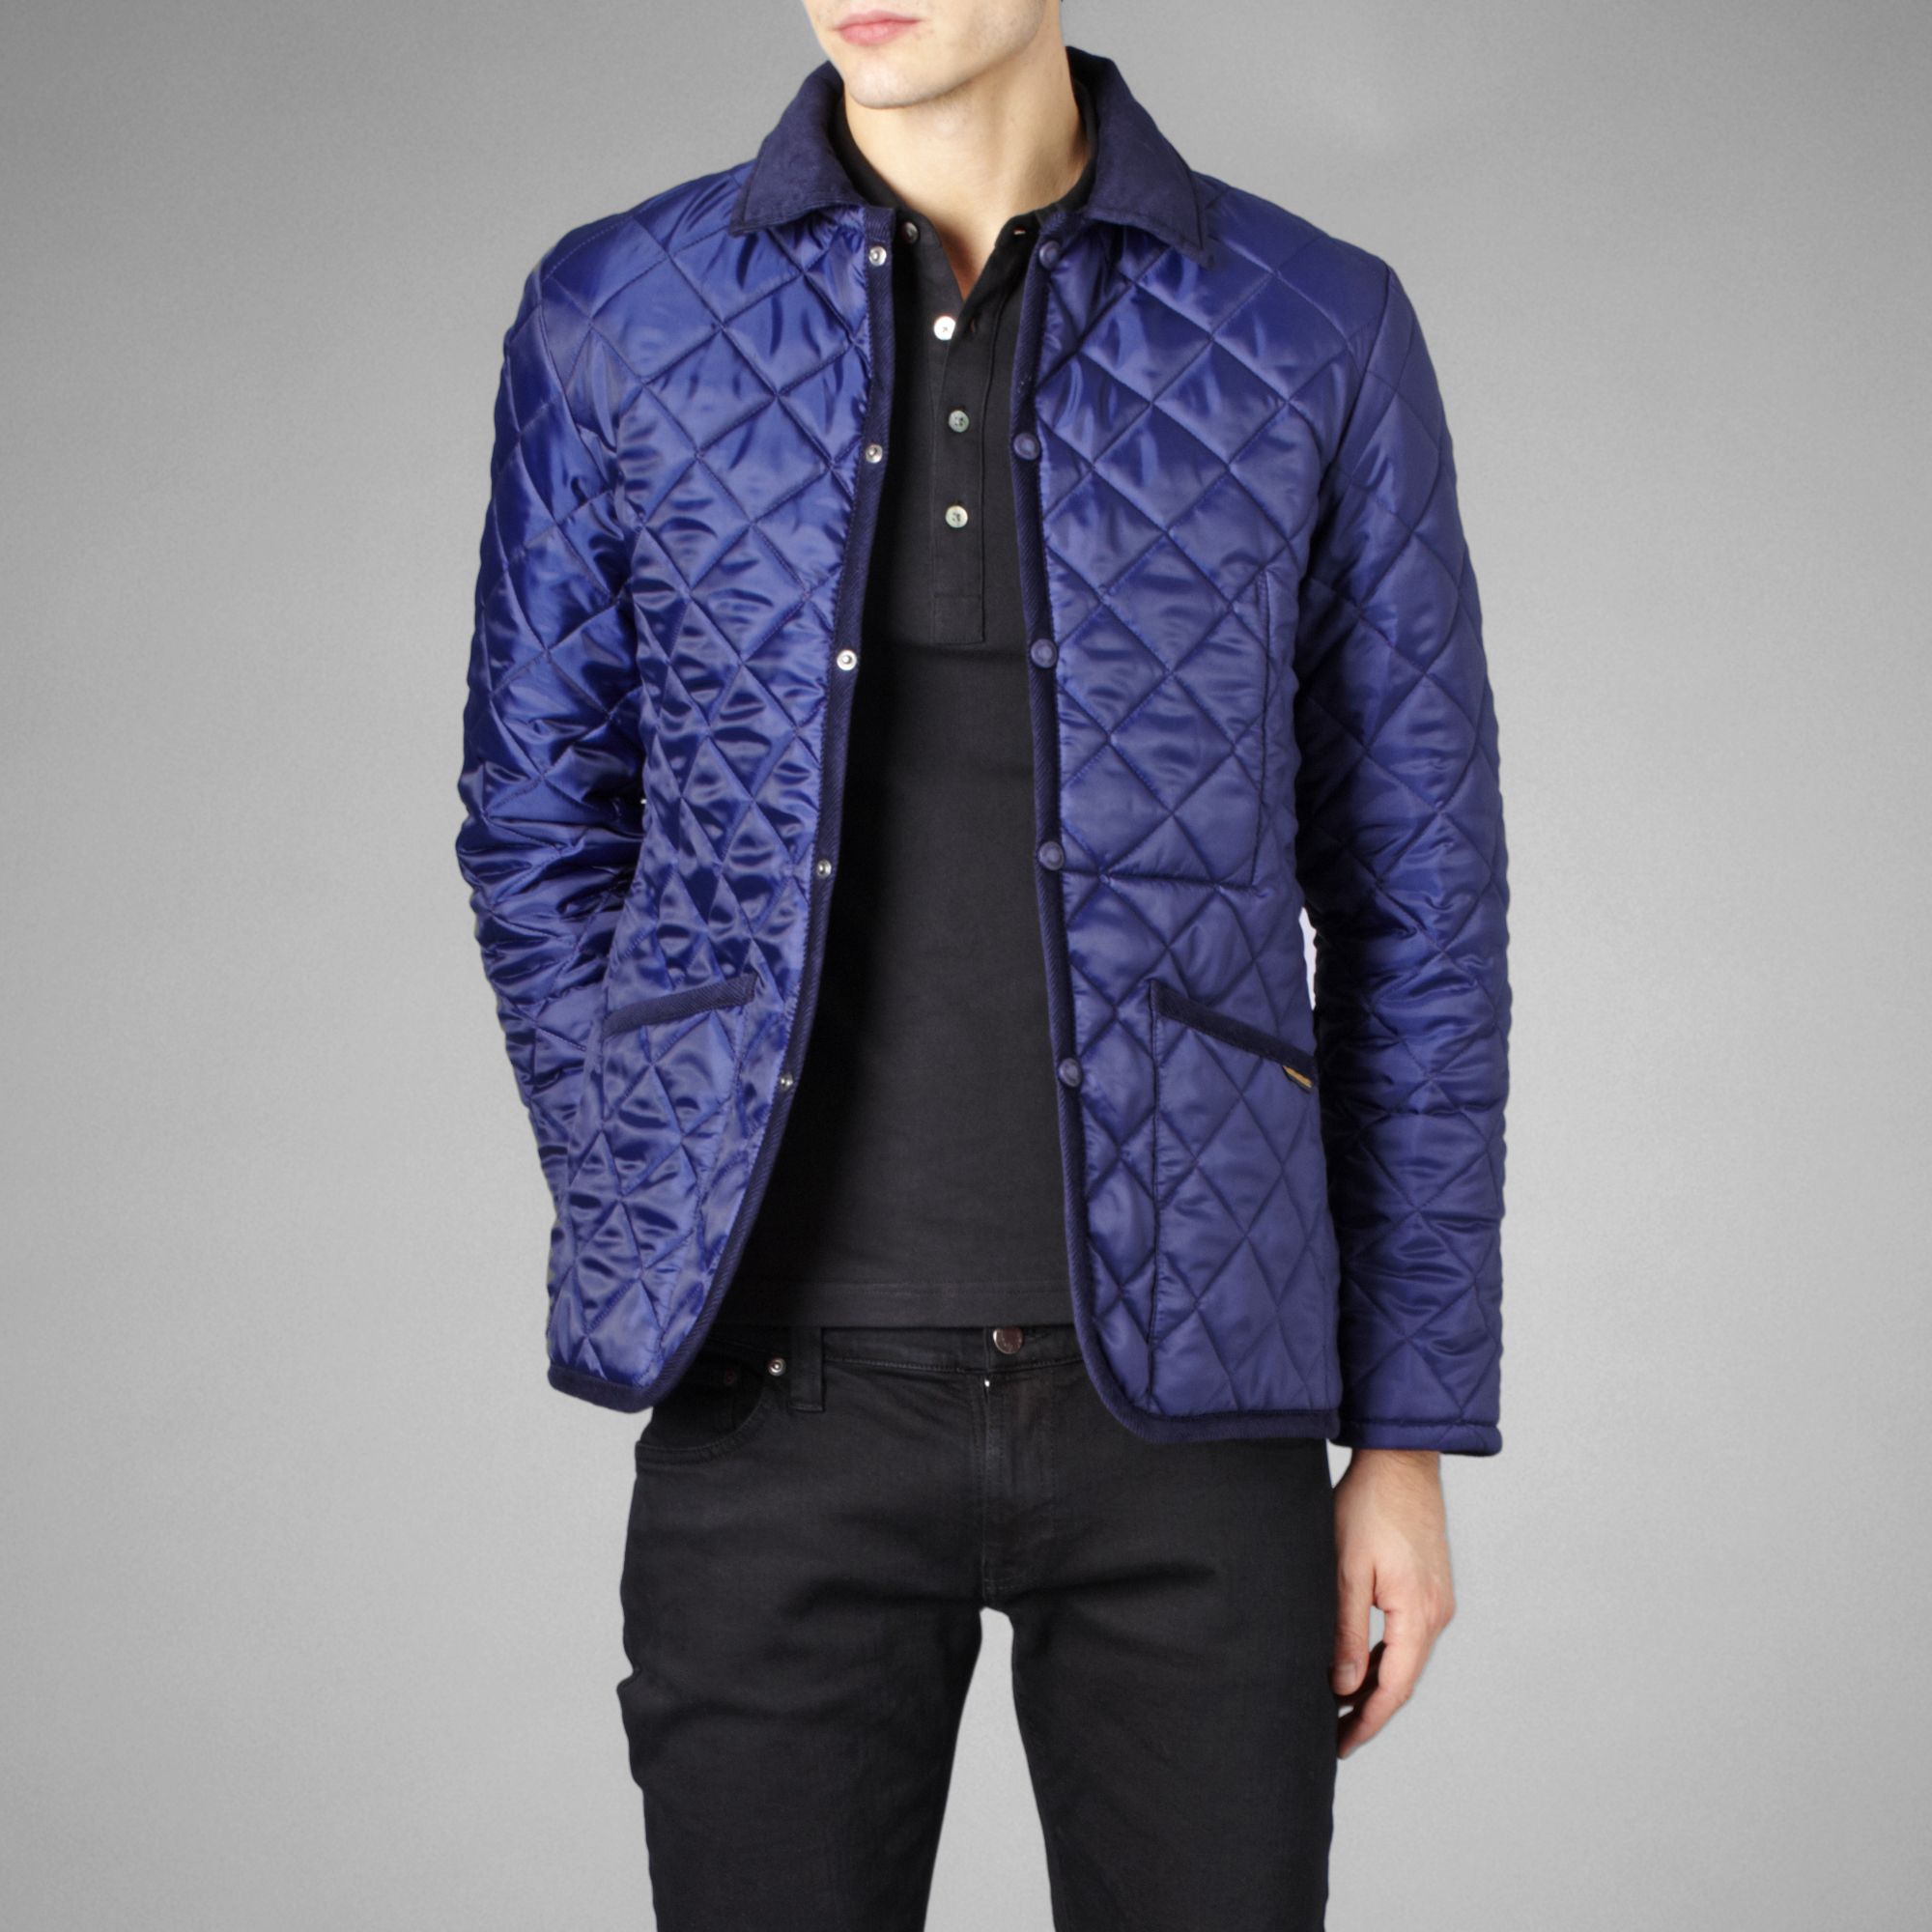 Lyst - Lavenham Raydon Quilted Cord Trim Jacket in Blue for Men